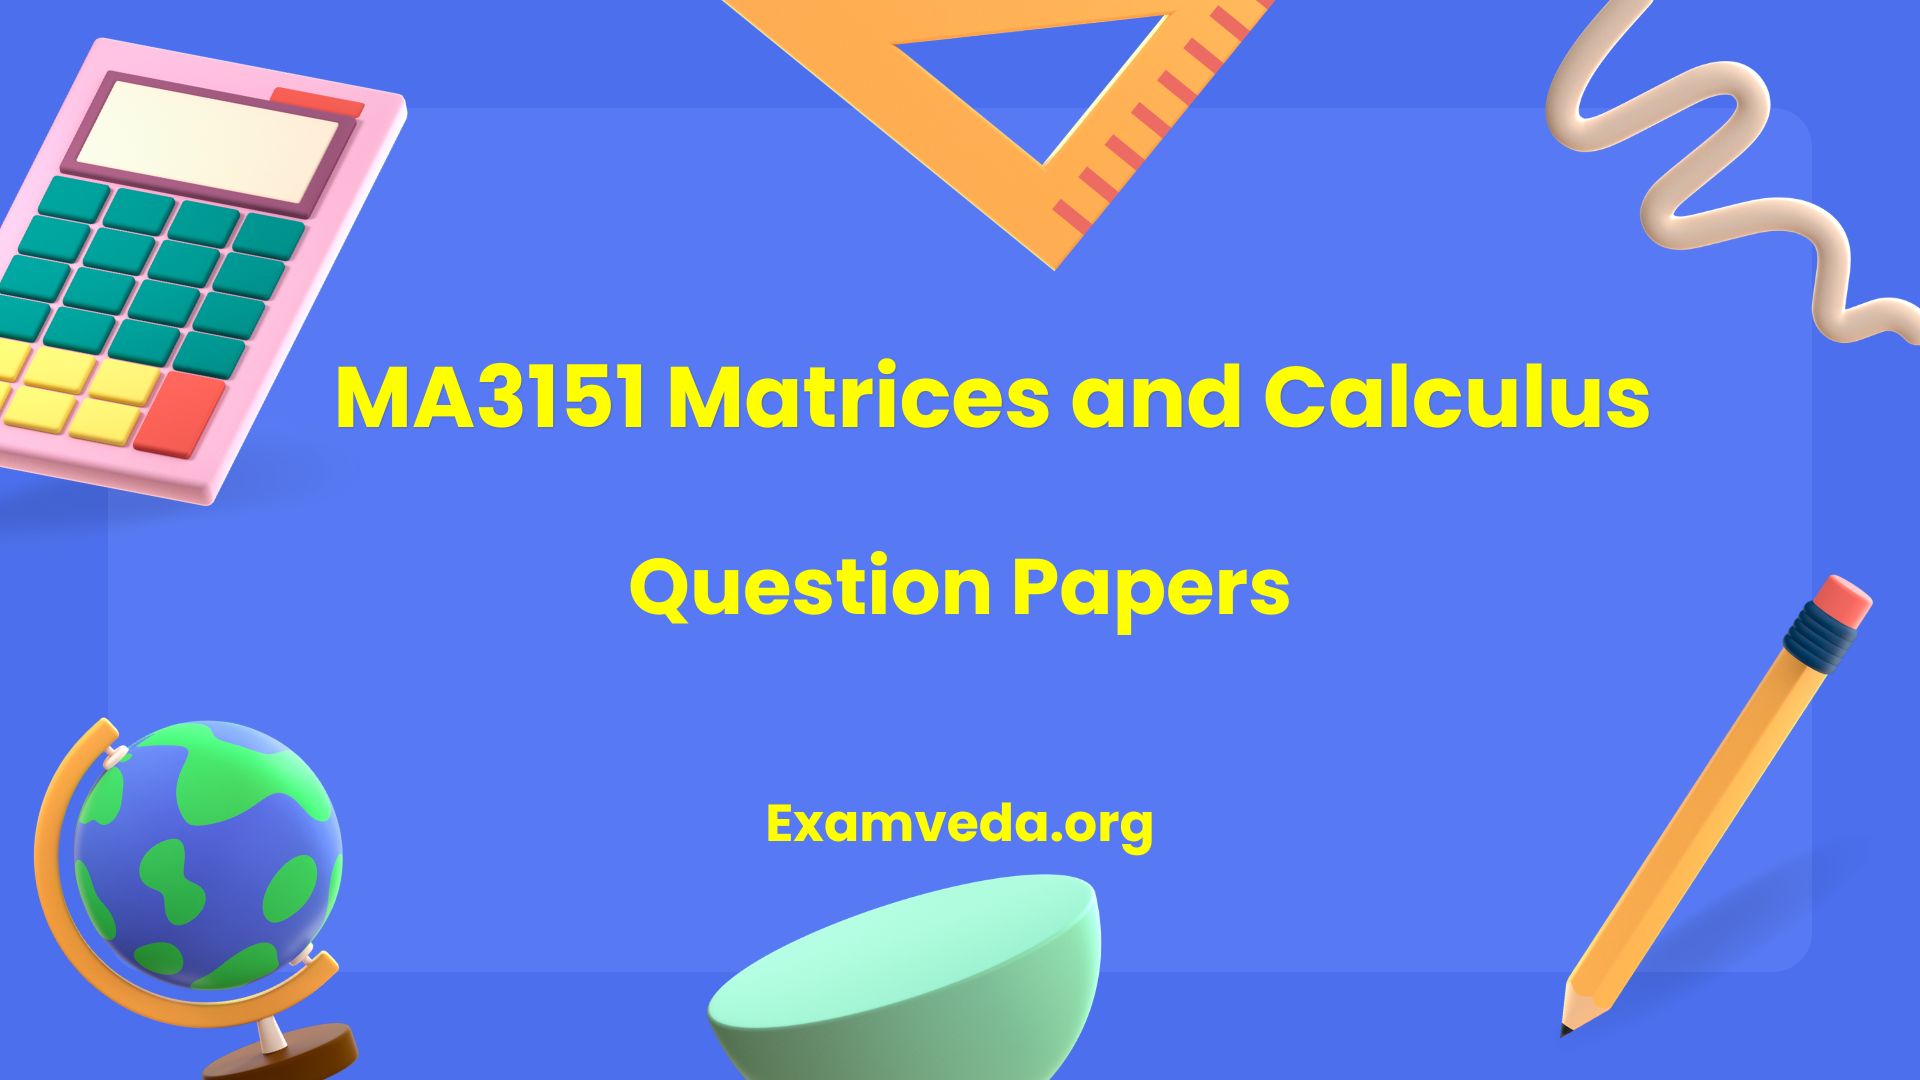 MA3151 Matrices and Calculus Question Papers